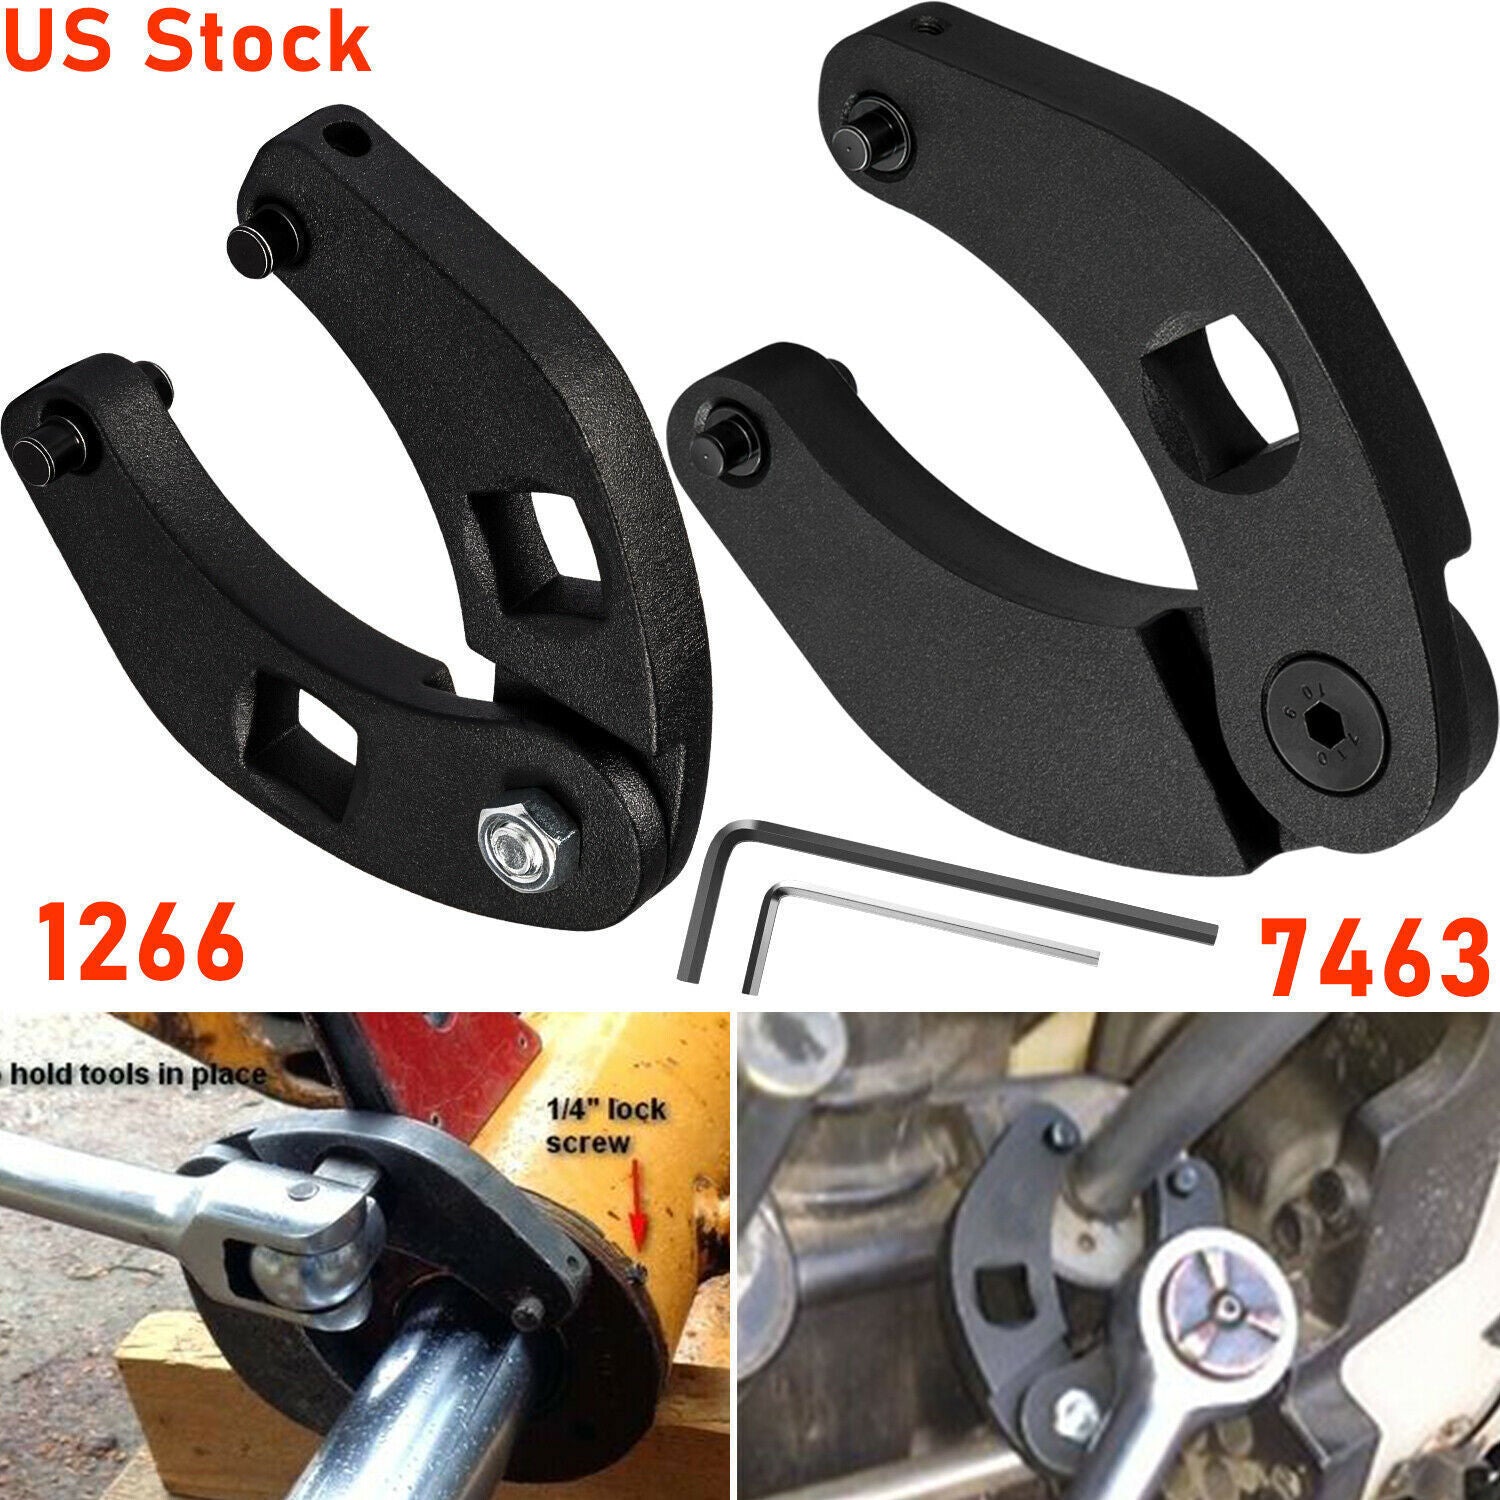 Adjustable Gland Nut Wrench 1266 +7463 Spanner Tool Set for Hydraulic Cylinder_4